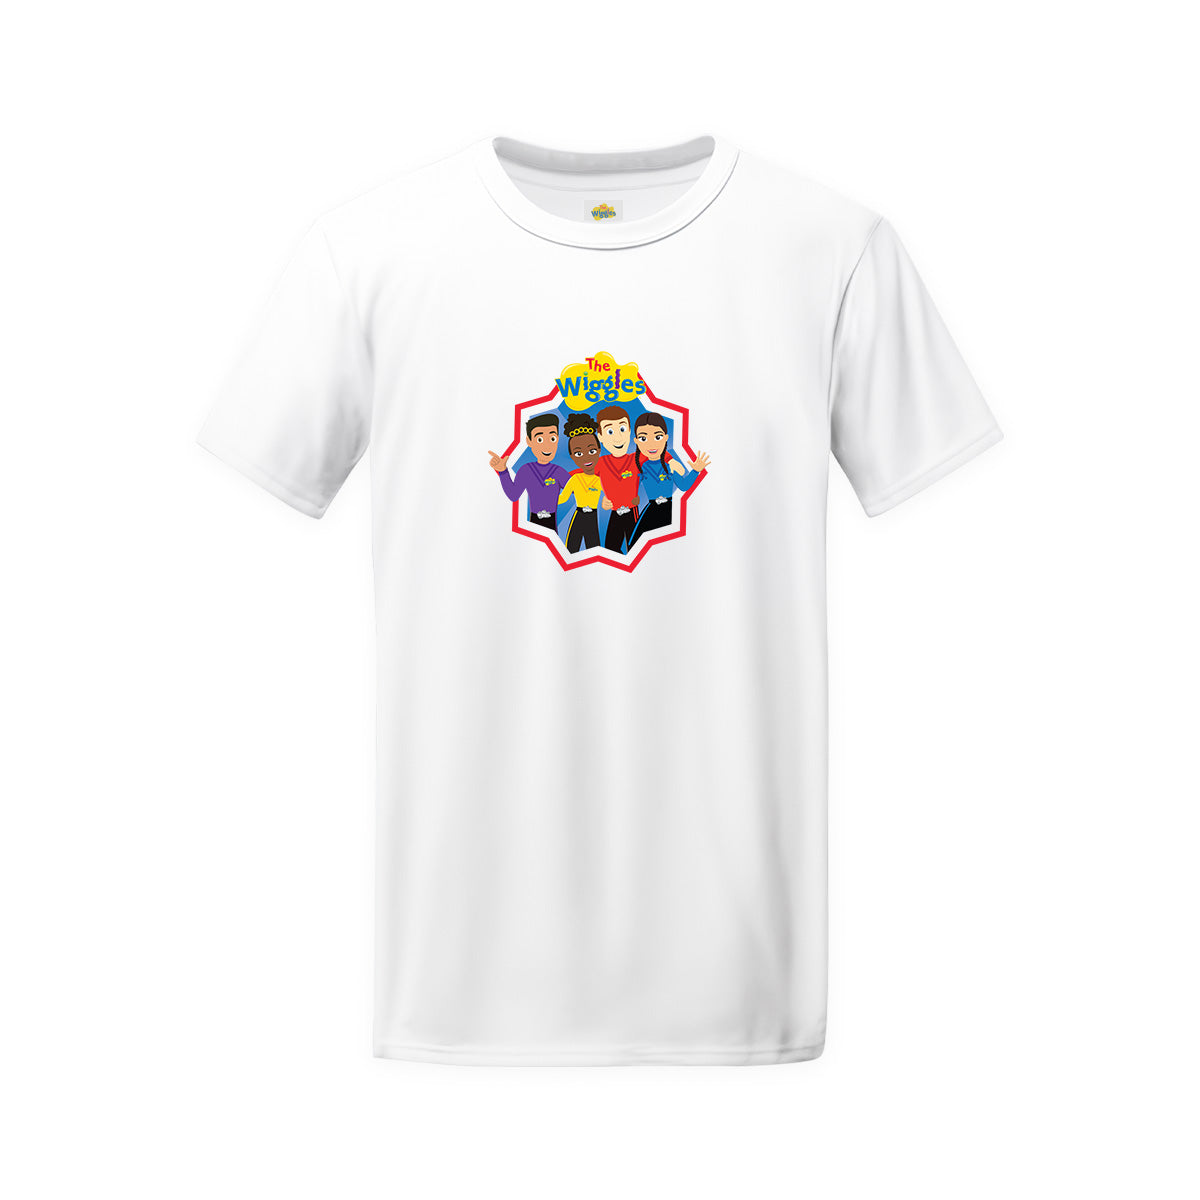 The Wiggles Adult Group Short Sleeve T-Shirt V3